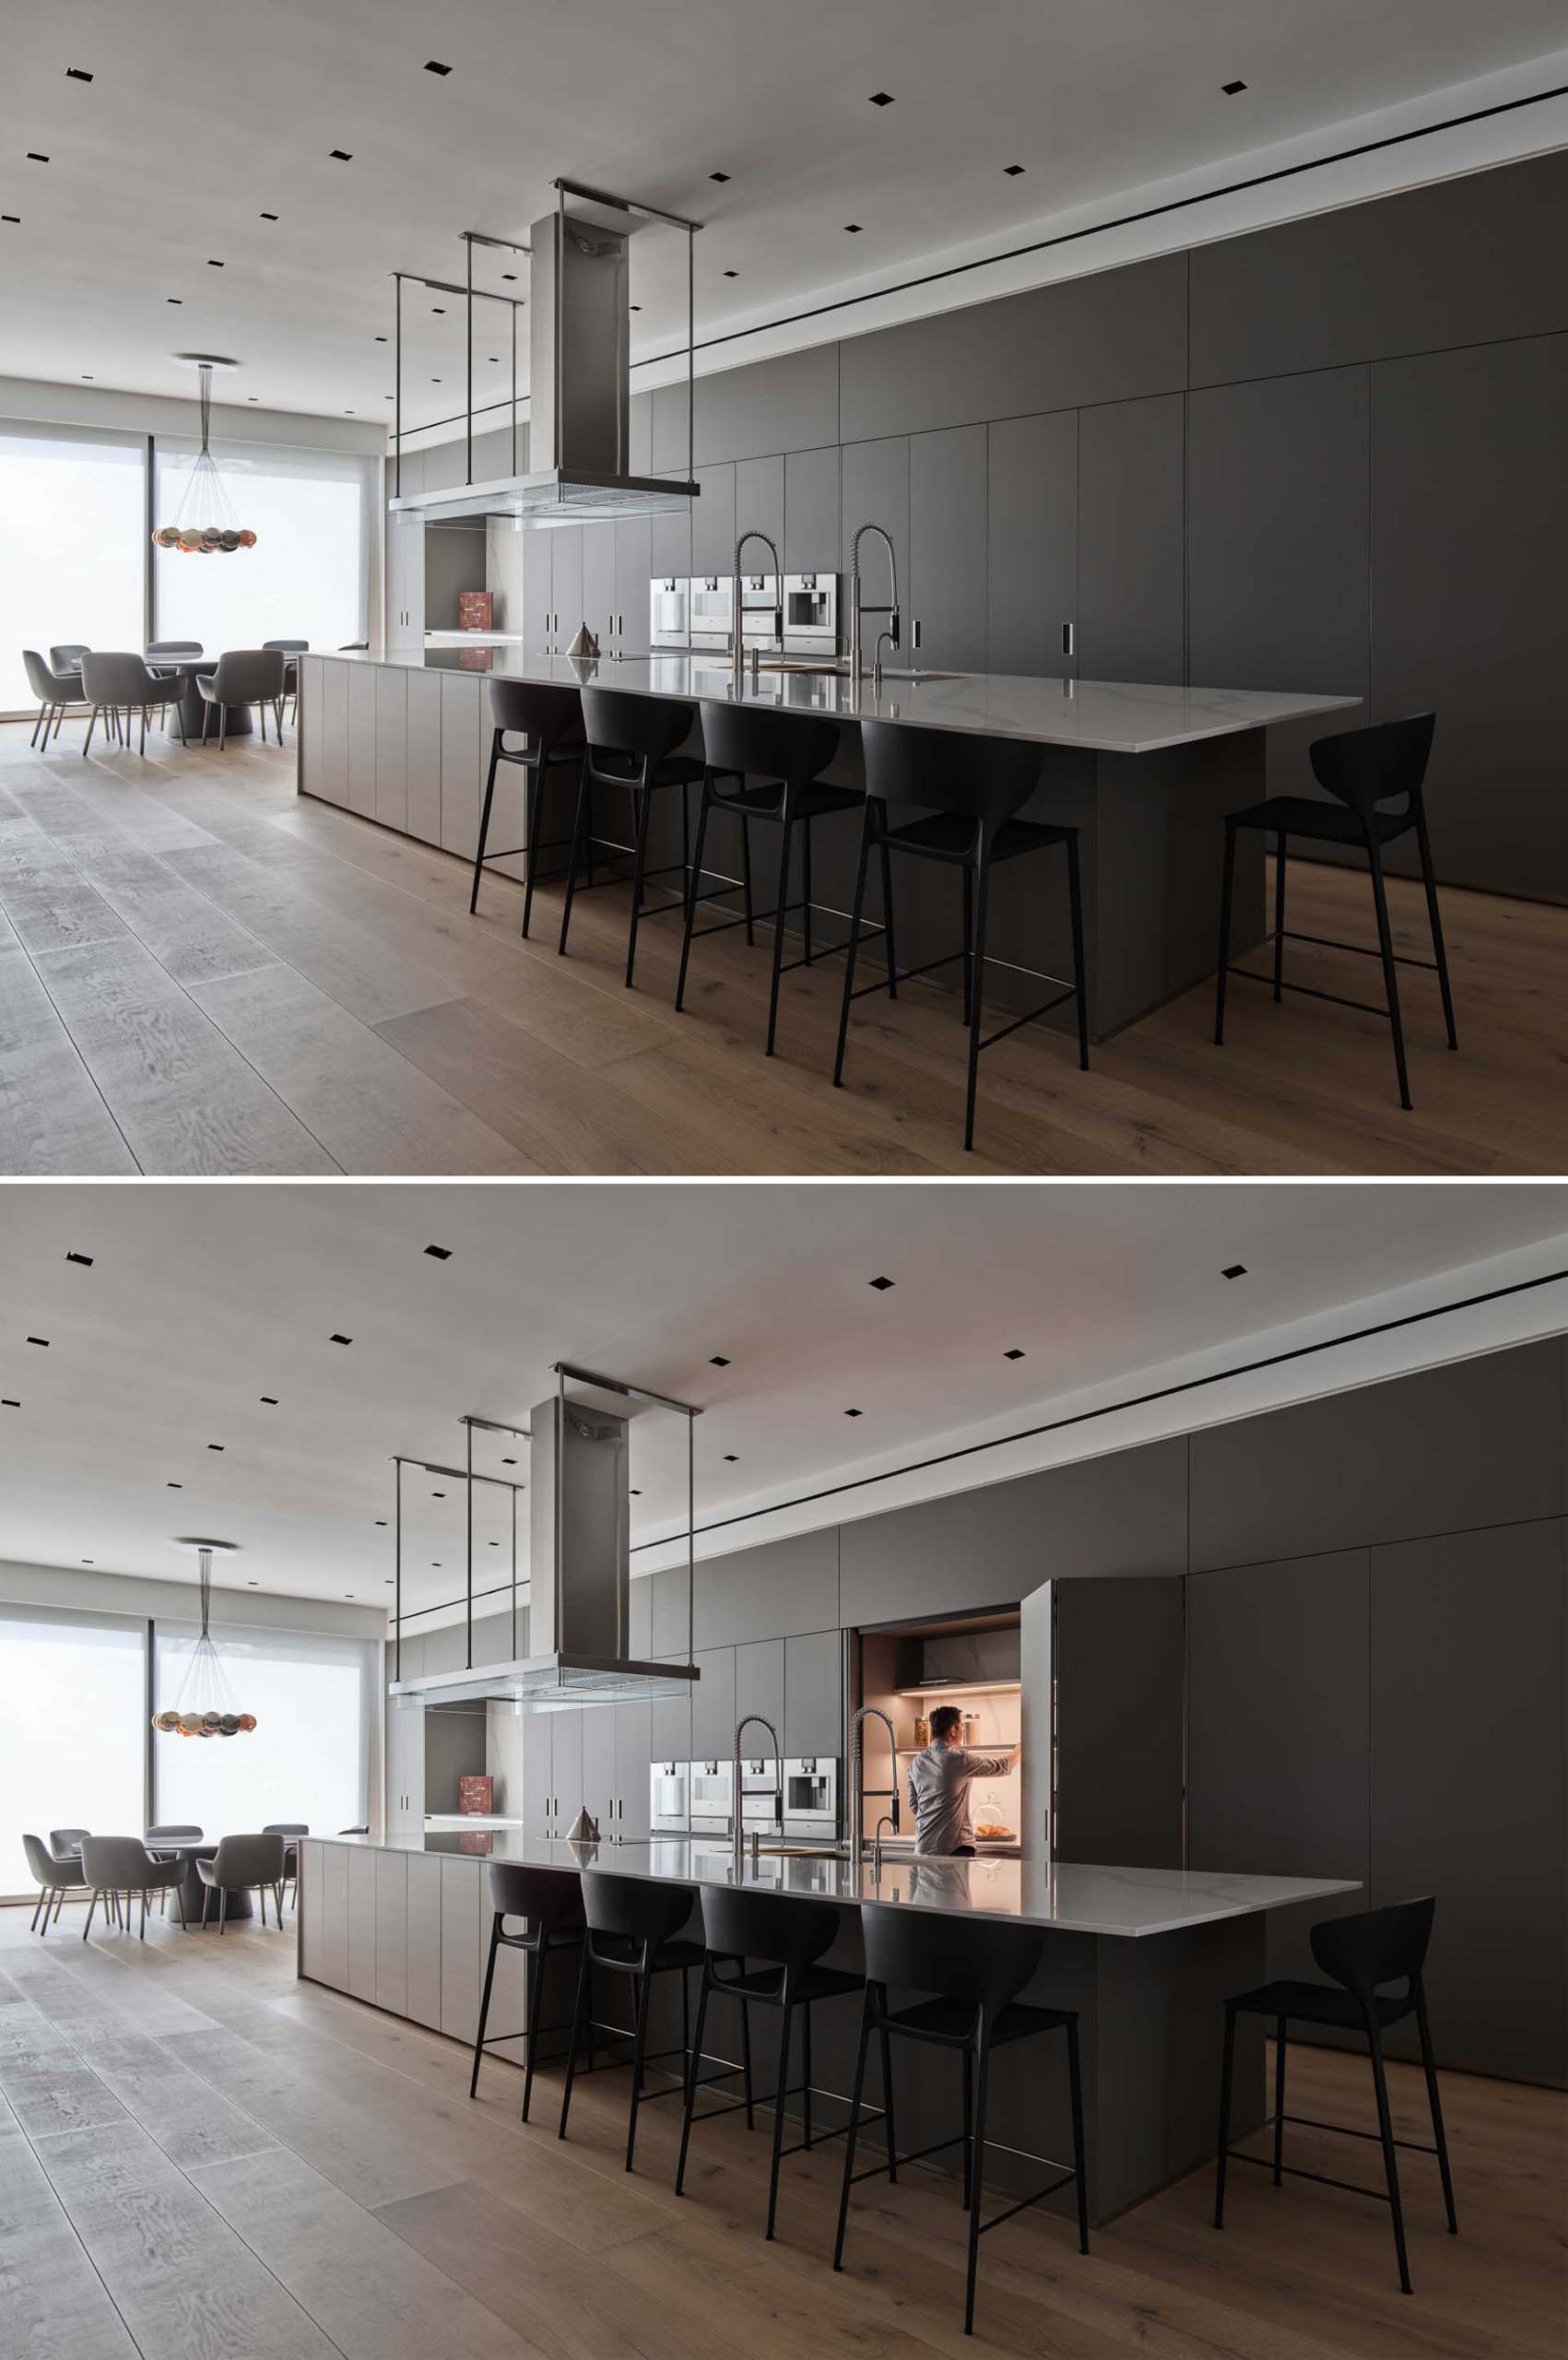 A modern kitchen with a long island and minimalist grey cabinets.